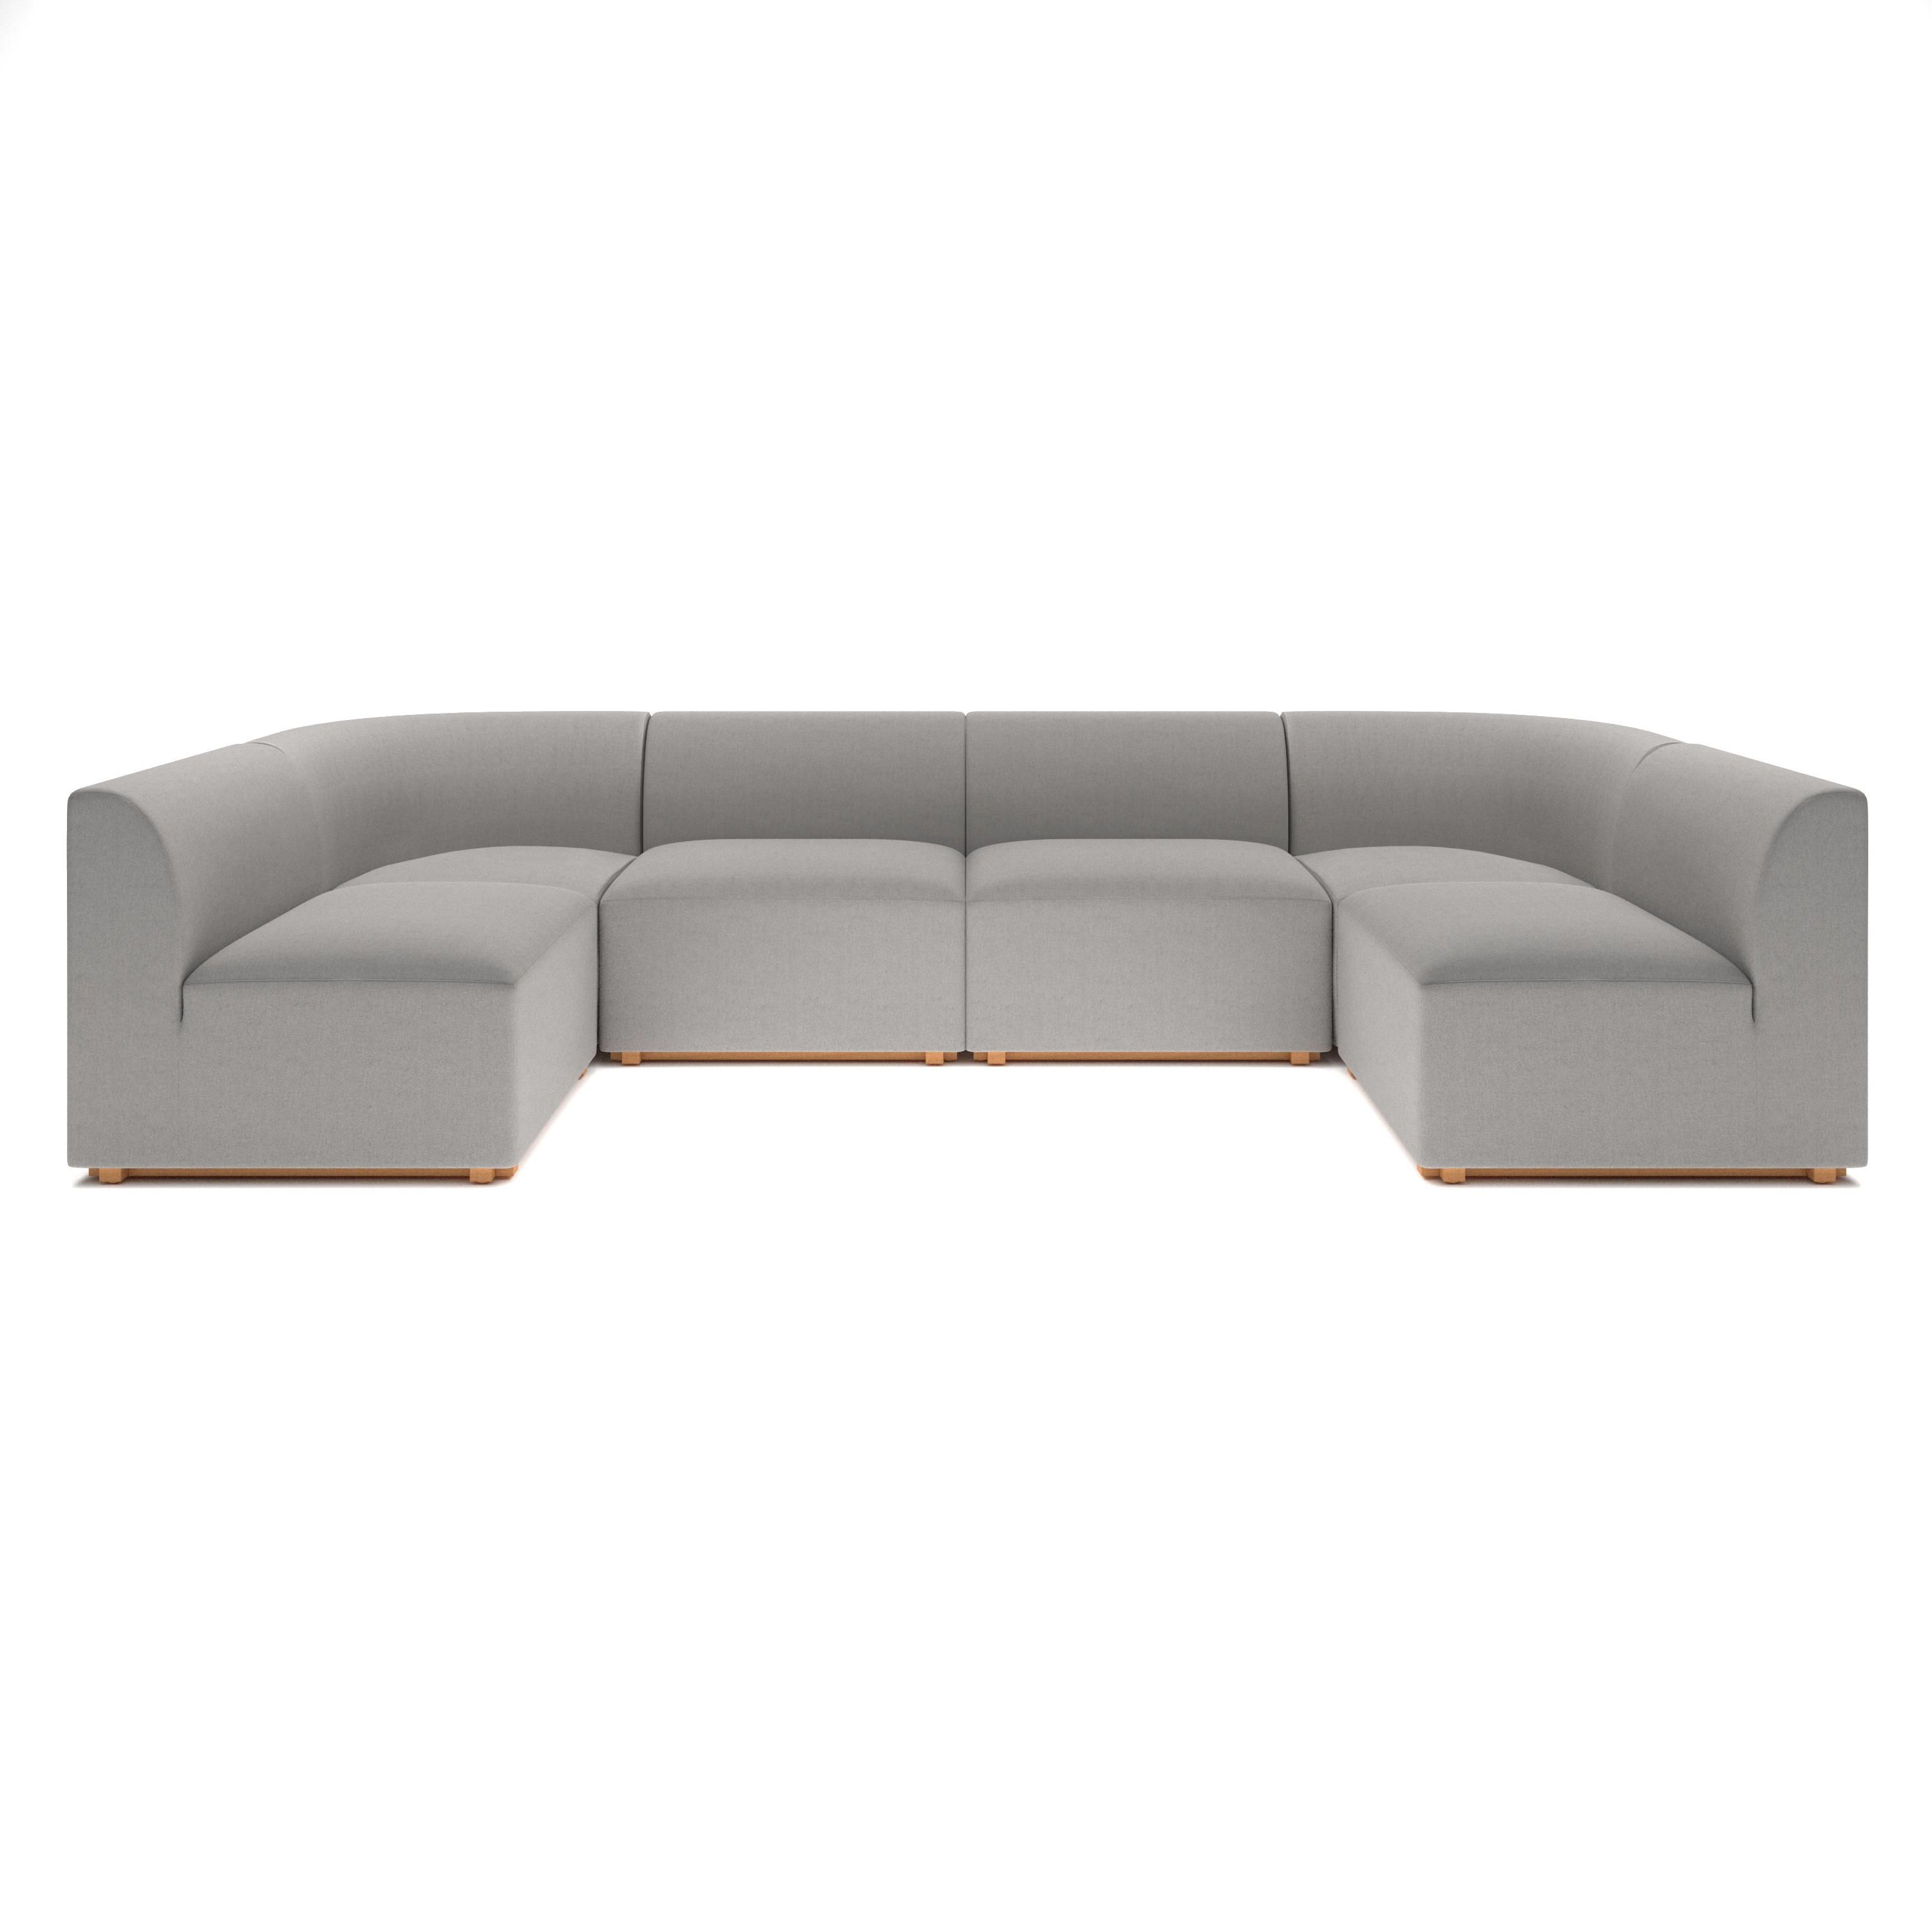 Blockhouse Modular Sectional – 6 Seat U Shaped Sofa | Rypen Collections |  Rypen Throughout 6 Seater Modular Sectional Sofas (View 8 of 20)